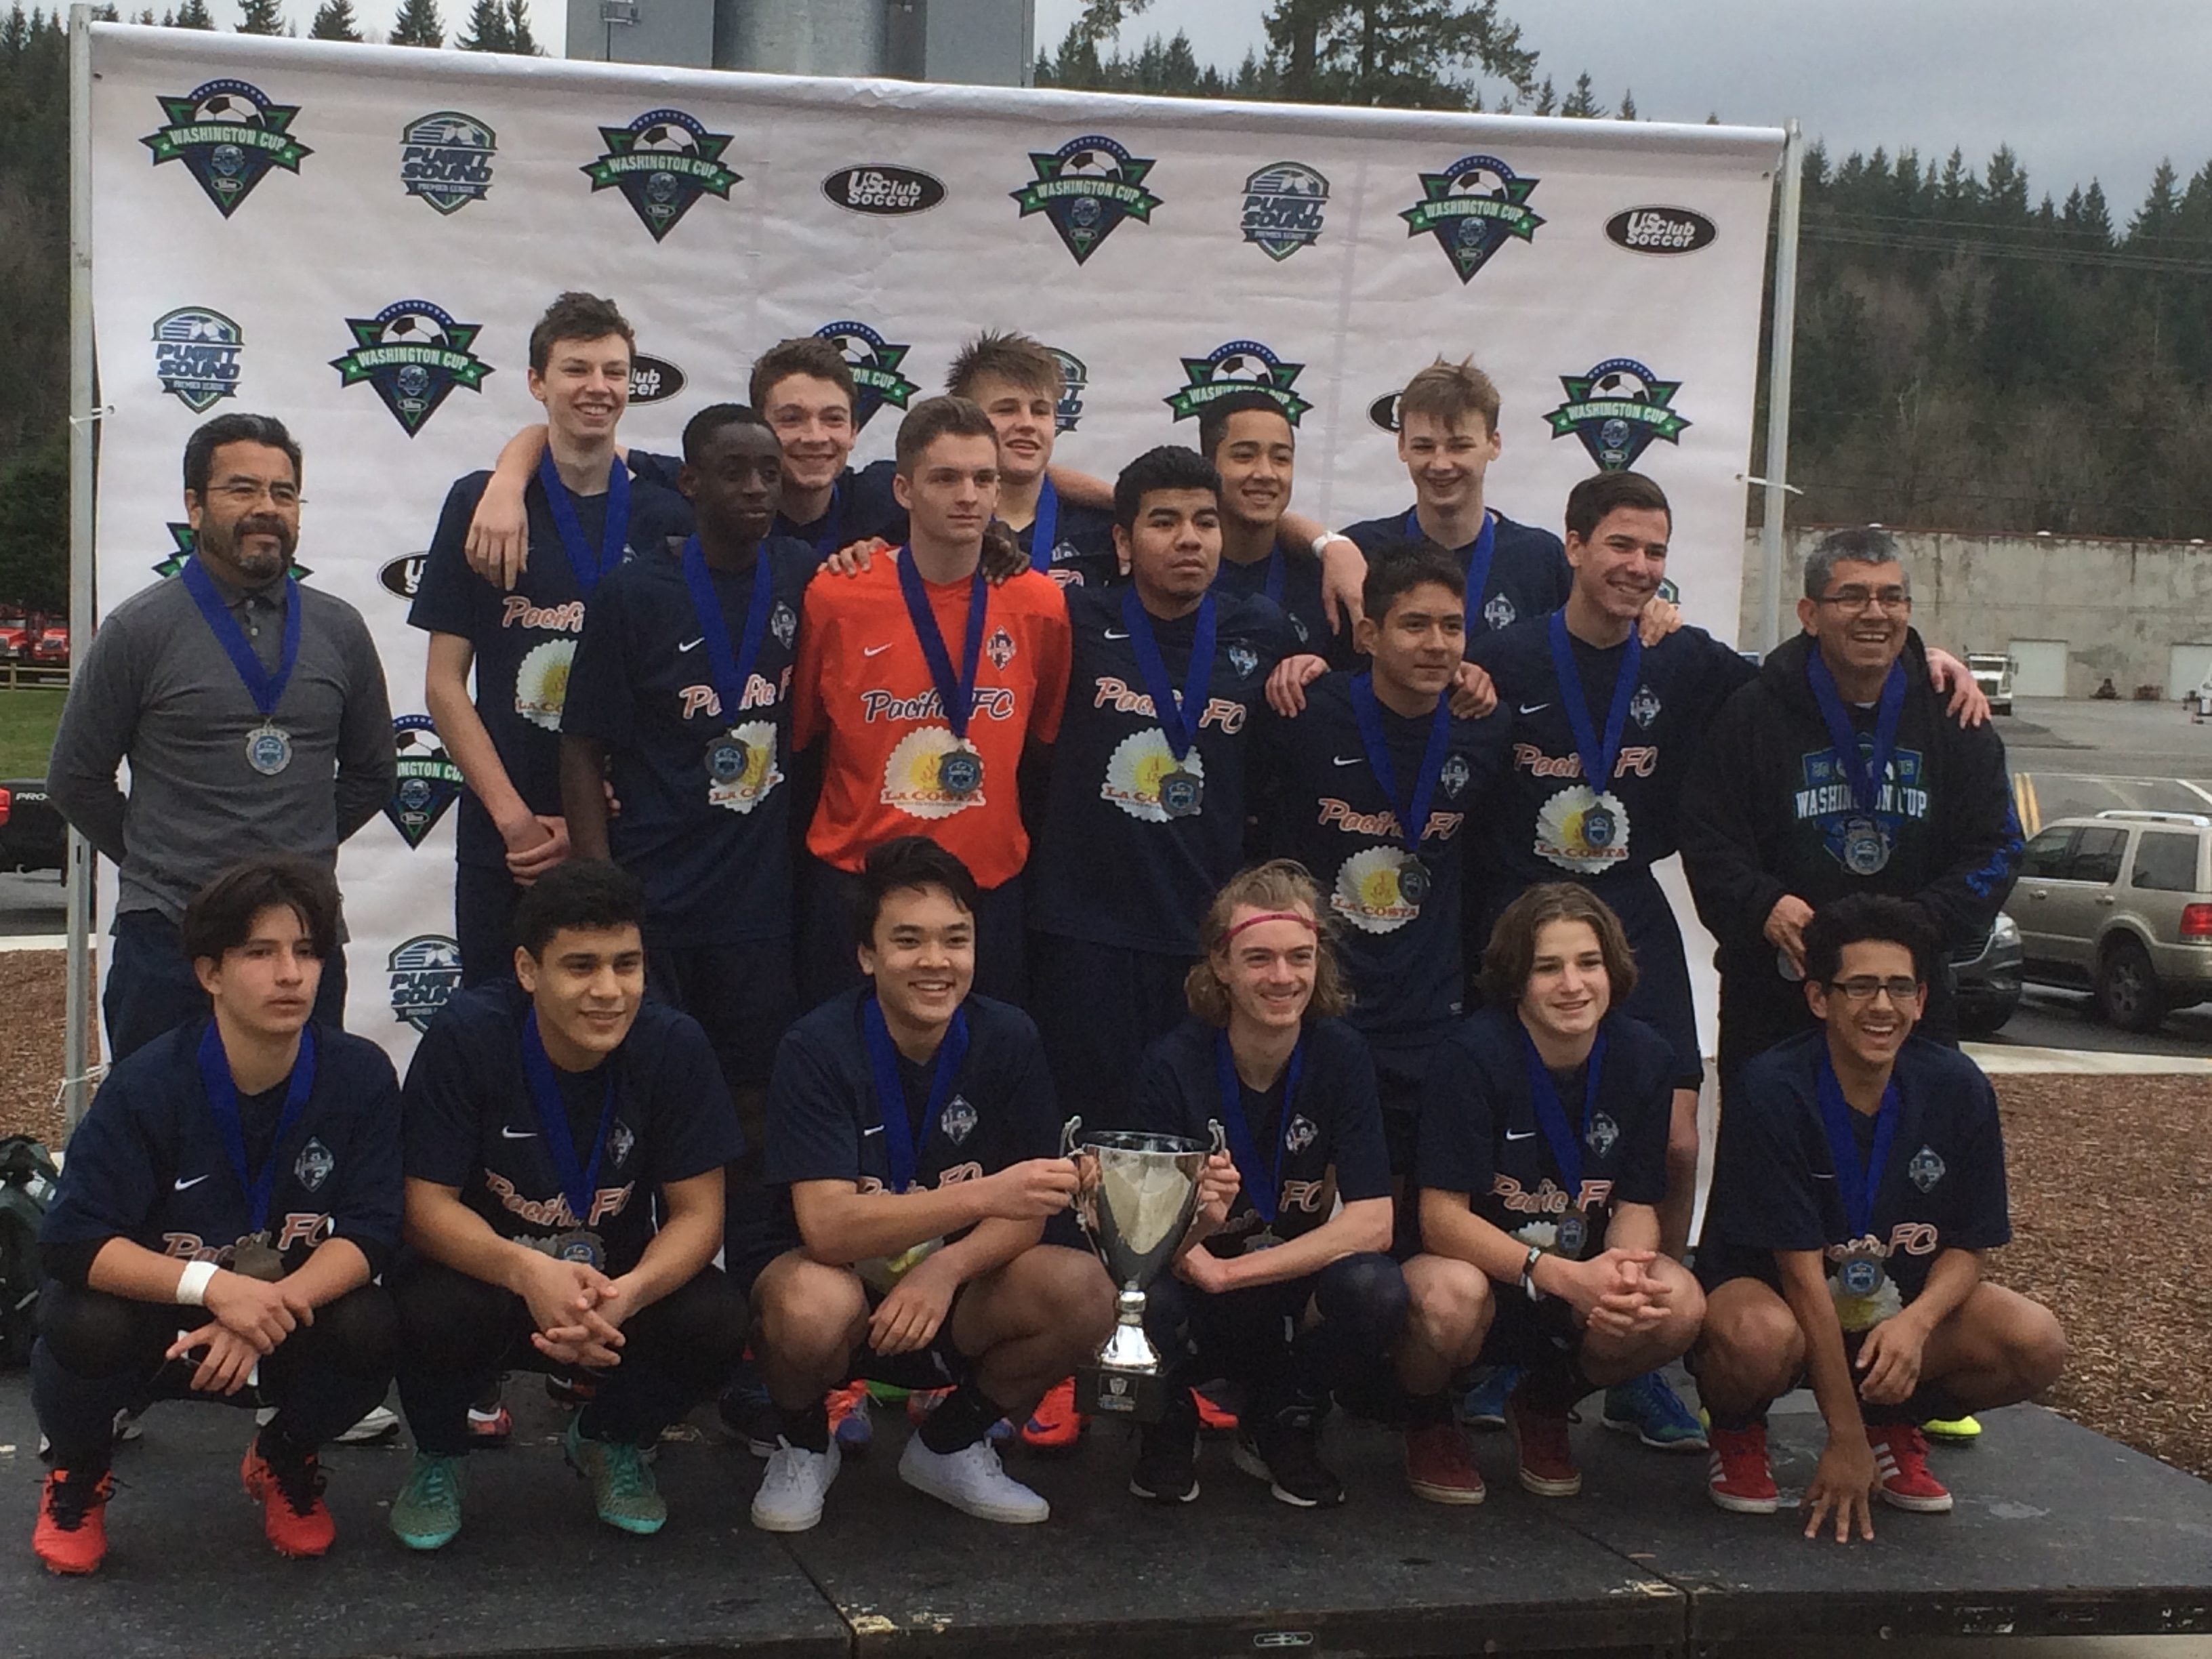 The Pacific FC B98 Cheetahs won the finals of the Puget Sound Premier League Washington Cup in Ravensdale on Sunday, Feb. 21, 2016.